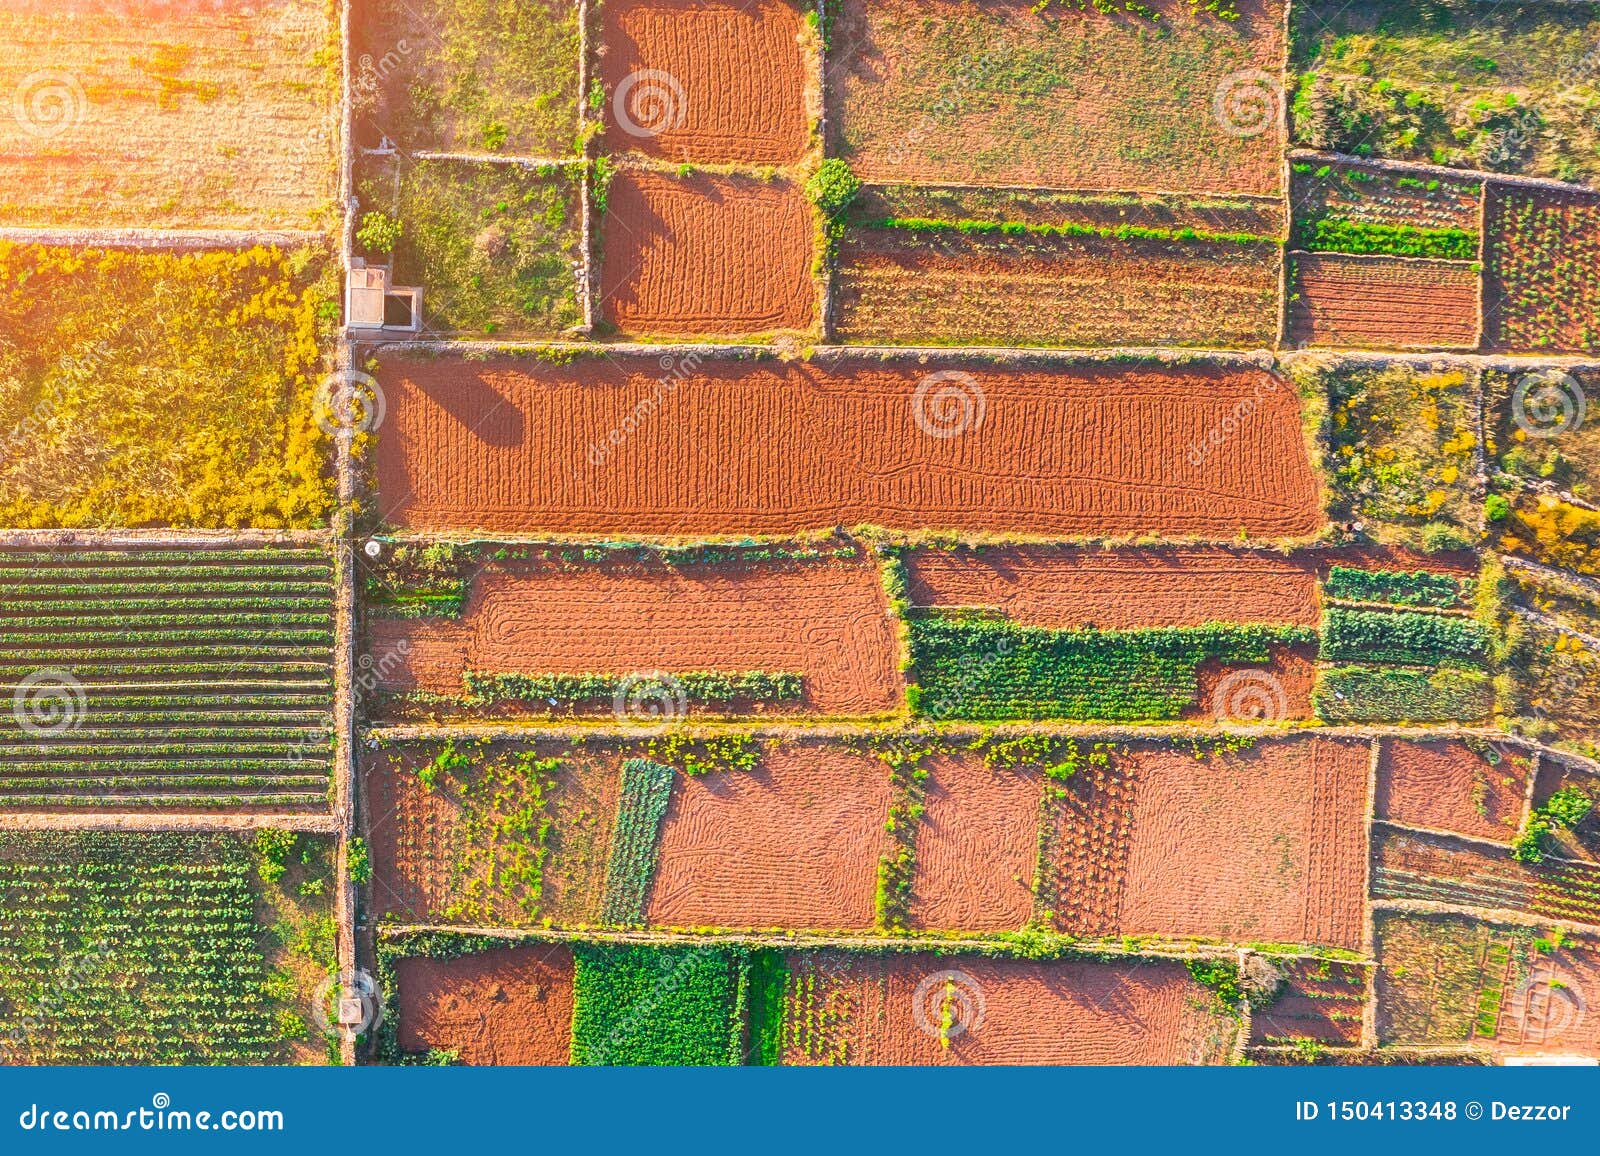 aerial view geometric s of agricultural parcels of different crops in green, brown, orange colors